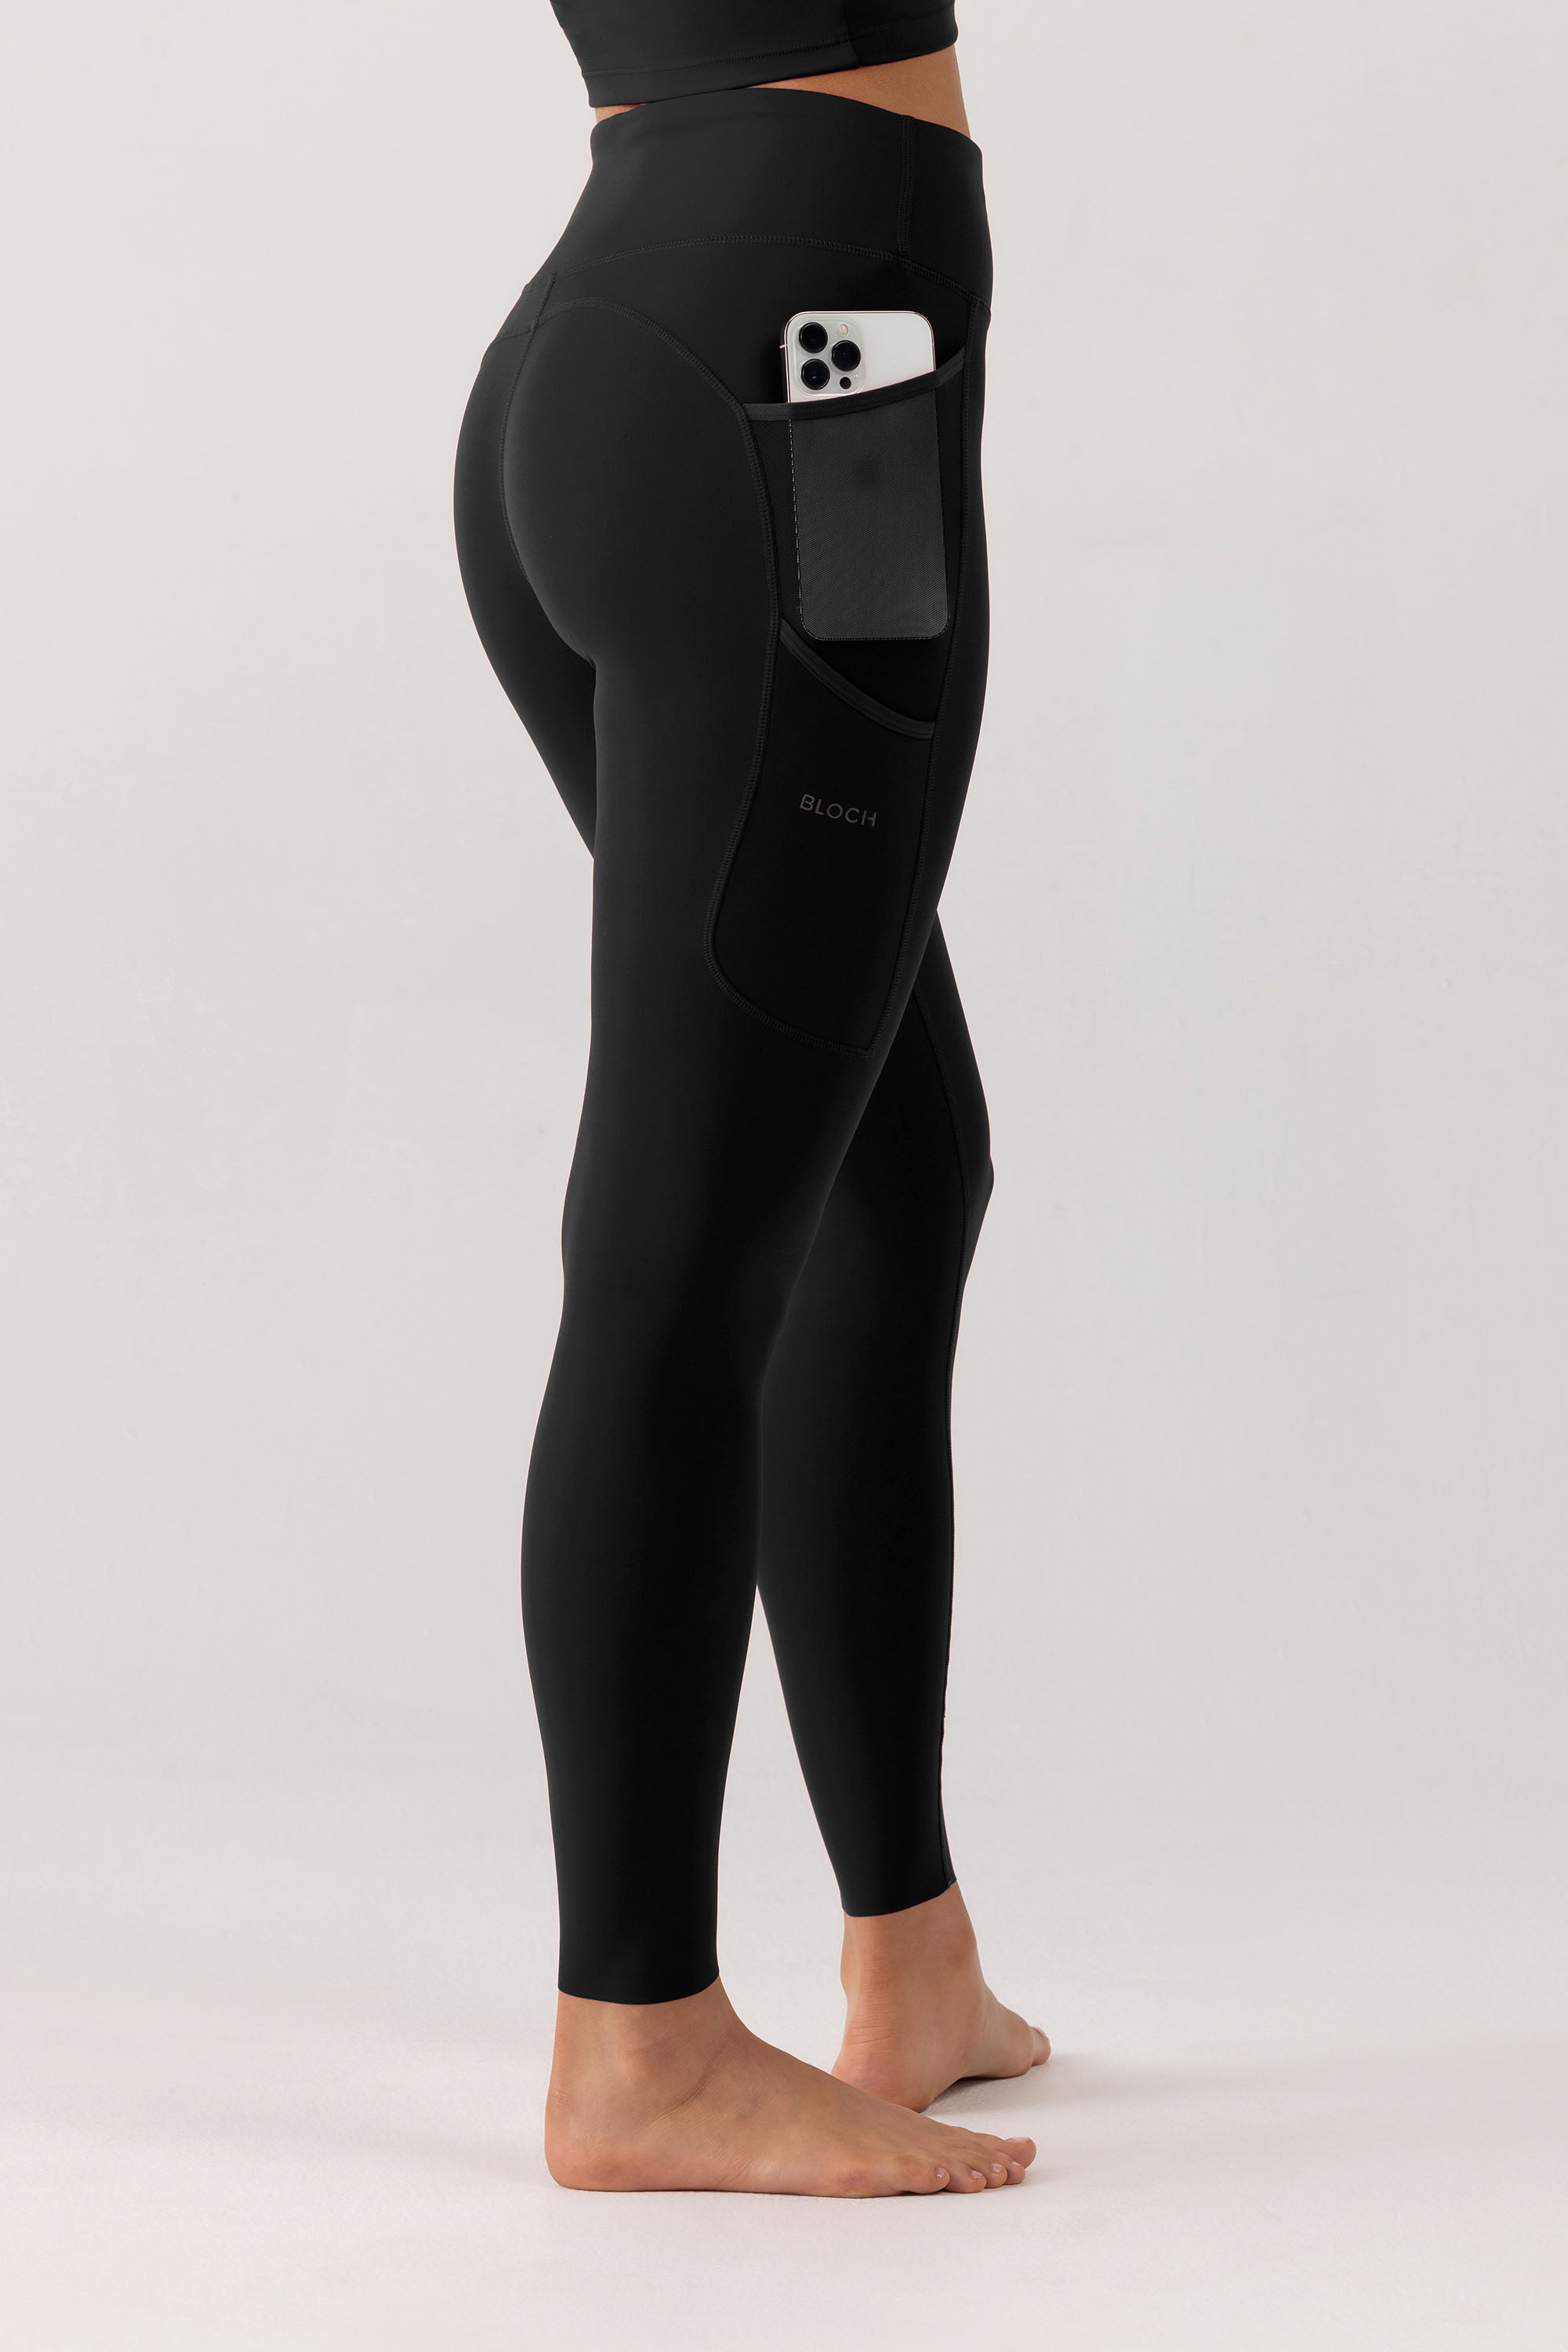 Bloch Leggings – And All That Jazz